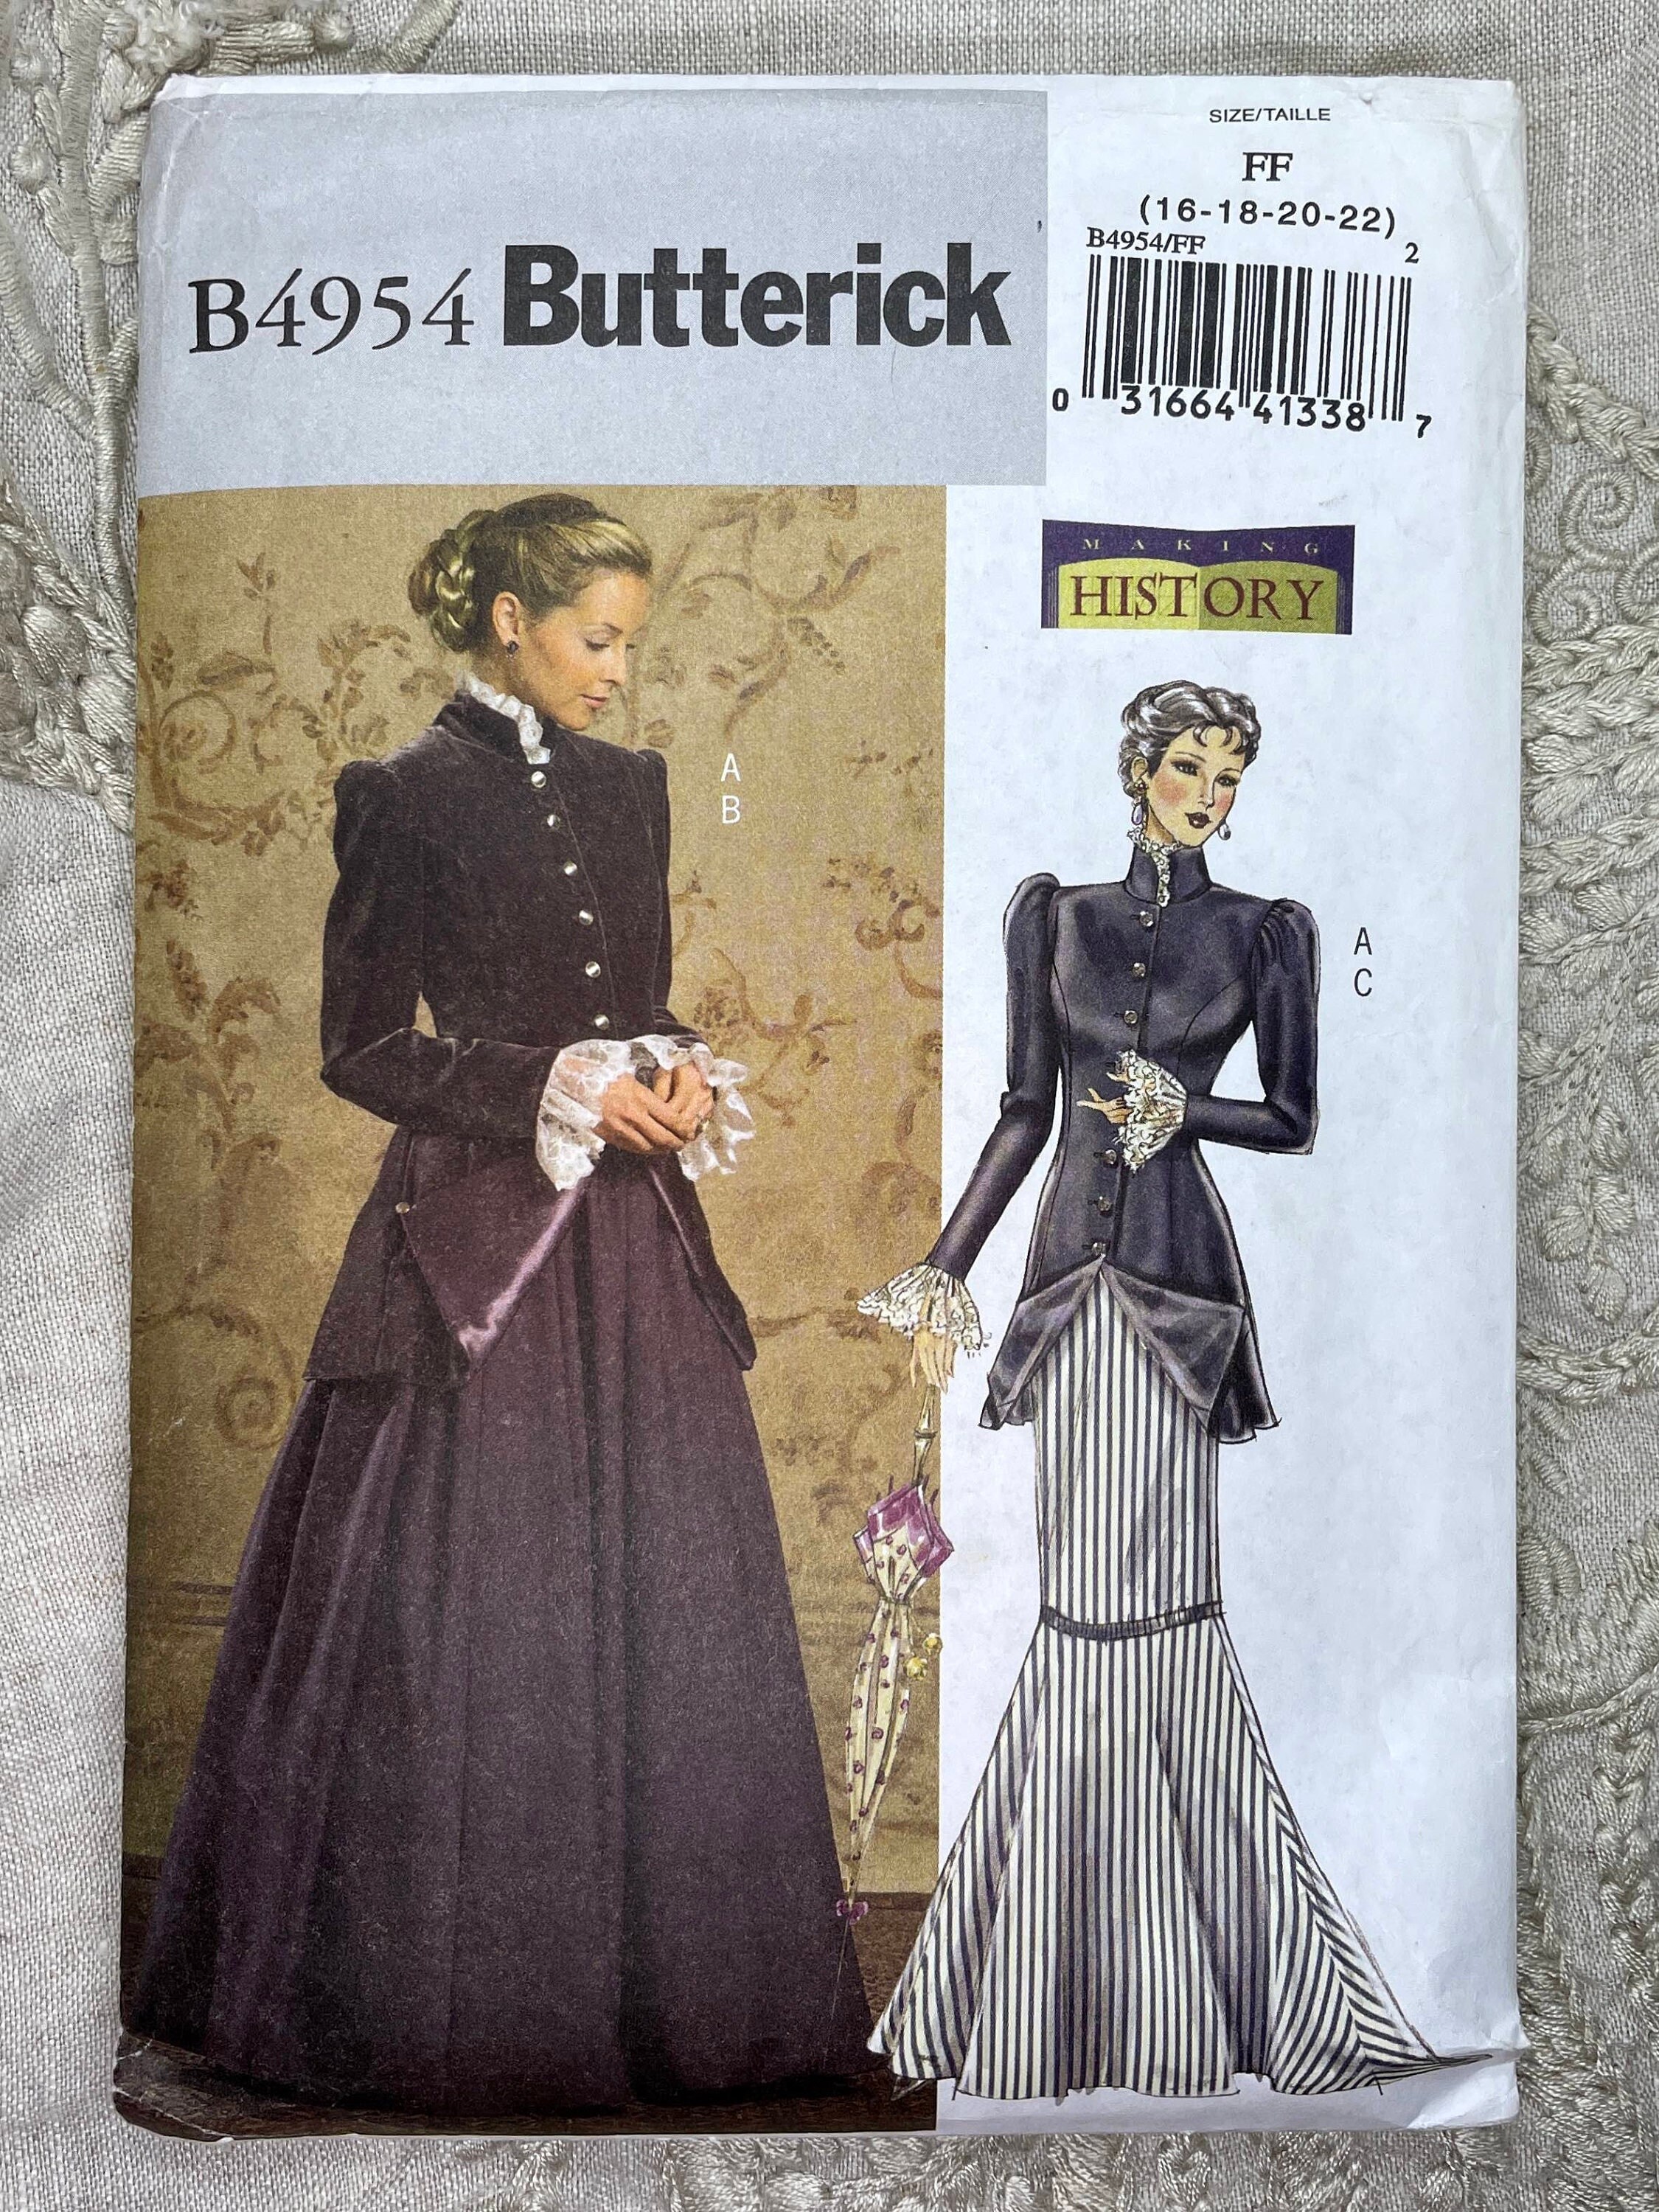 Butterick 4954 Sewing Pattern to MAKE Elegant Early 20th Century Skirt & Jacket 